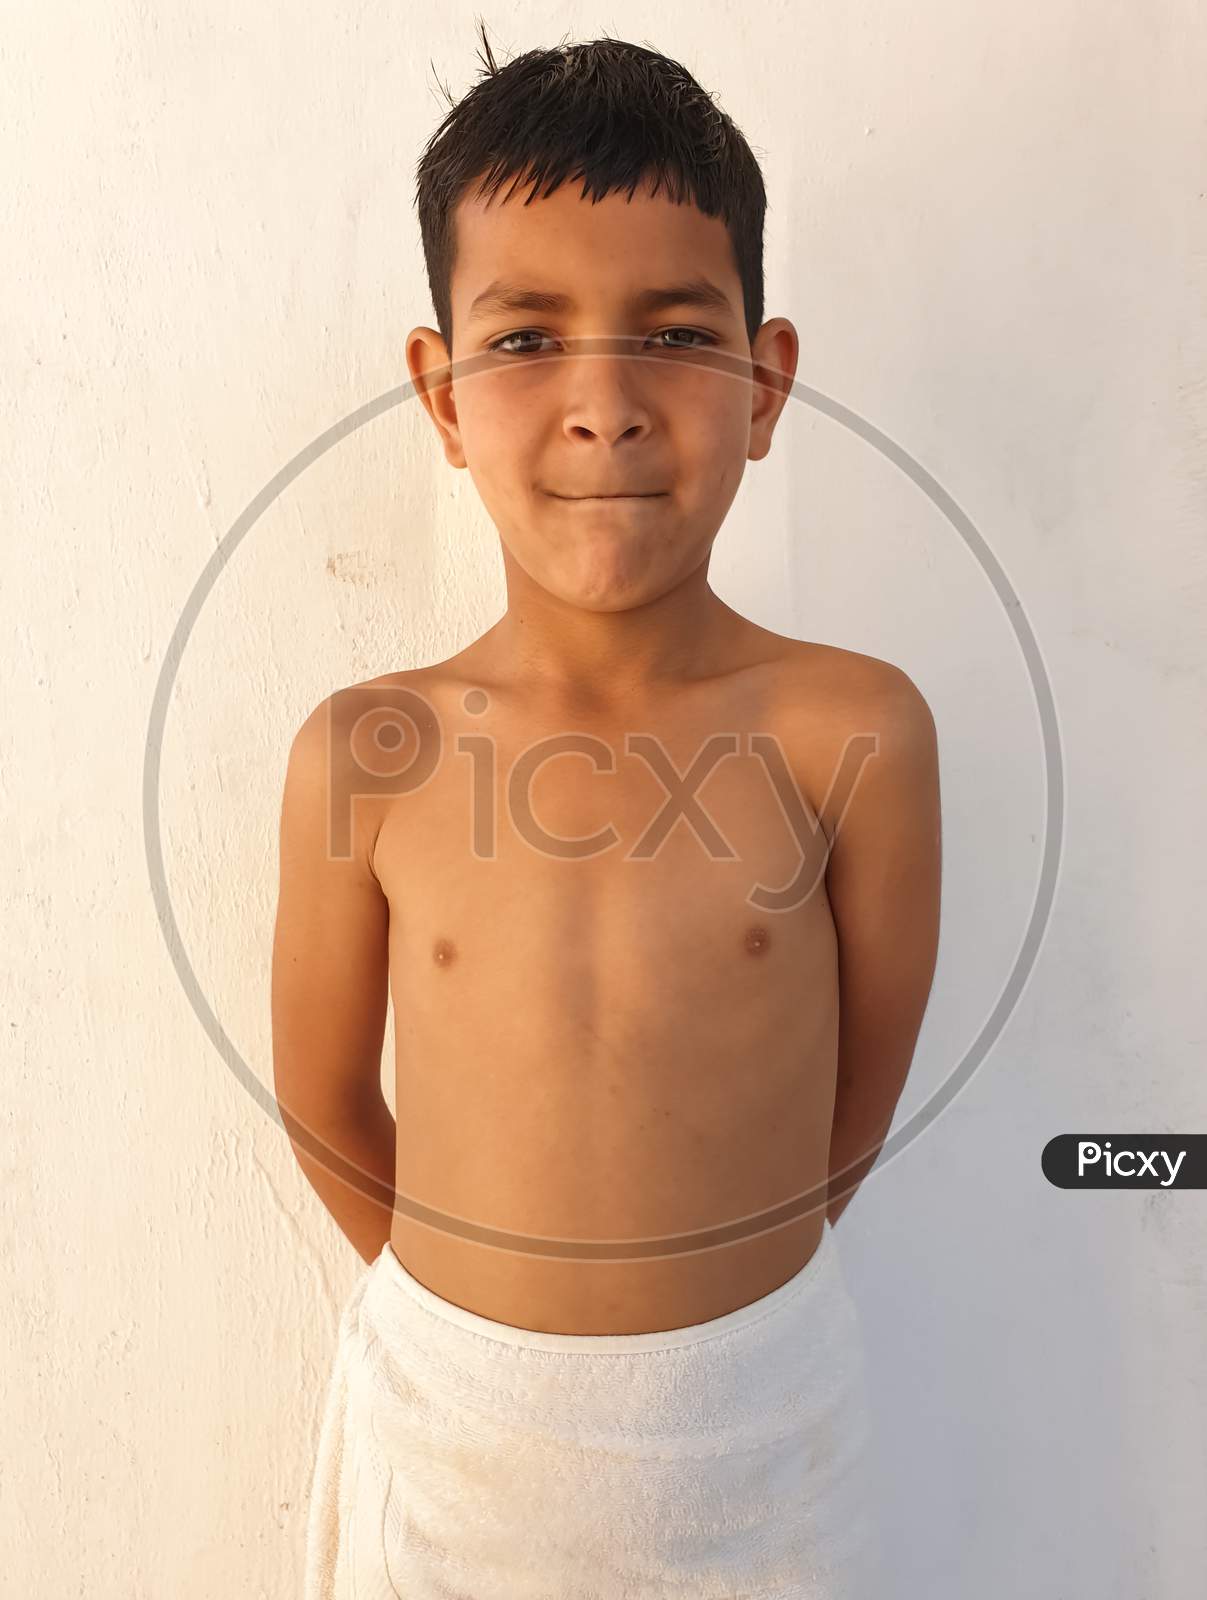 little kid with six pack